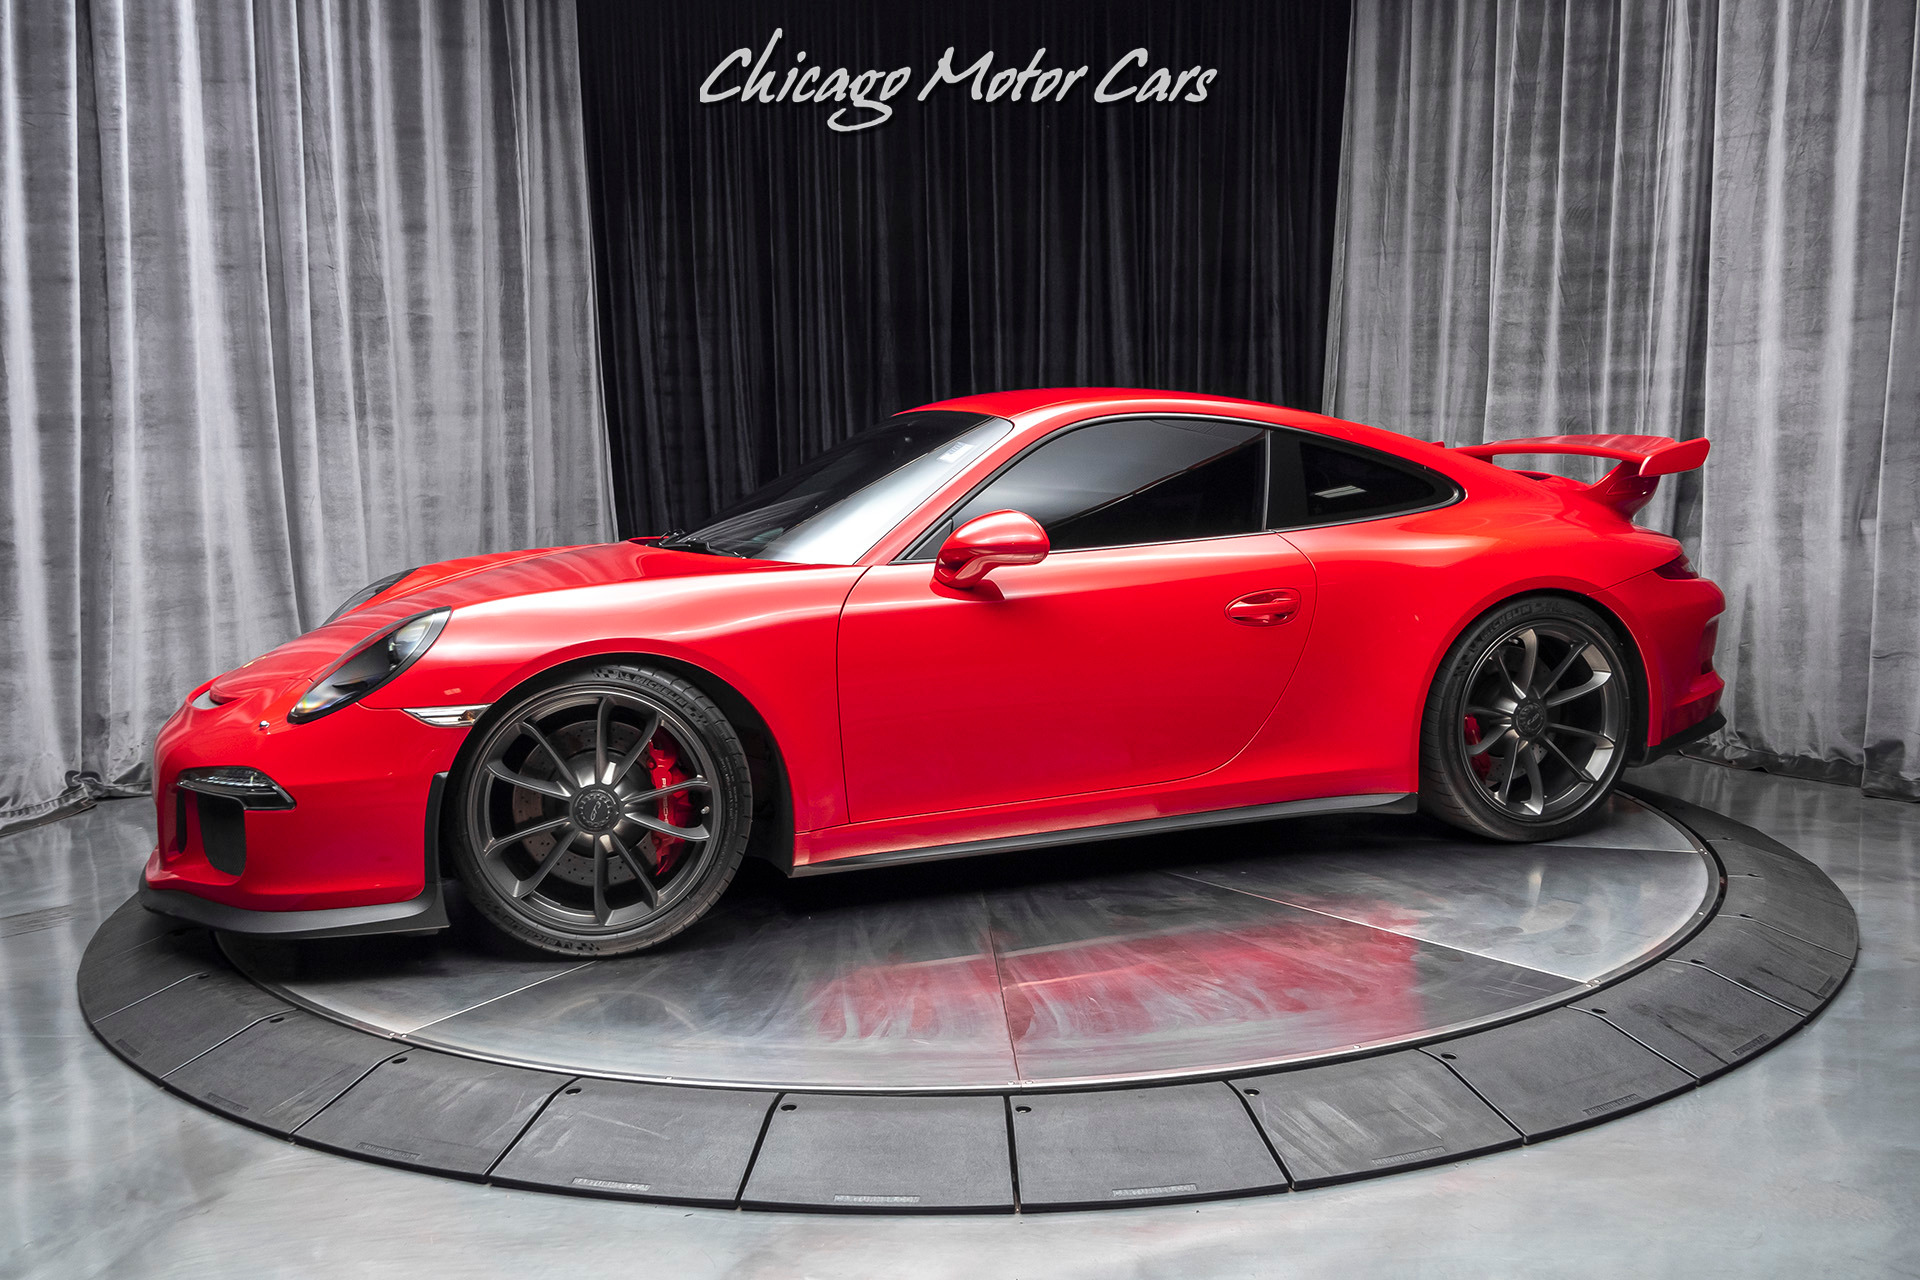 Used-2015-Porsche-911-GT3-Coupe-MSRP-139K-PDK-TRANS-FRONT-LIFT-AFTERMARKET-EXHAUST